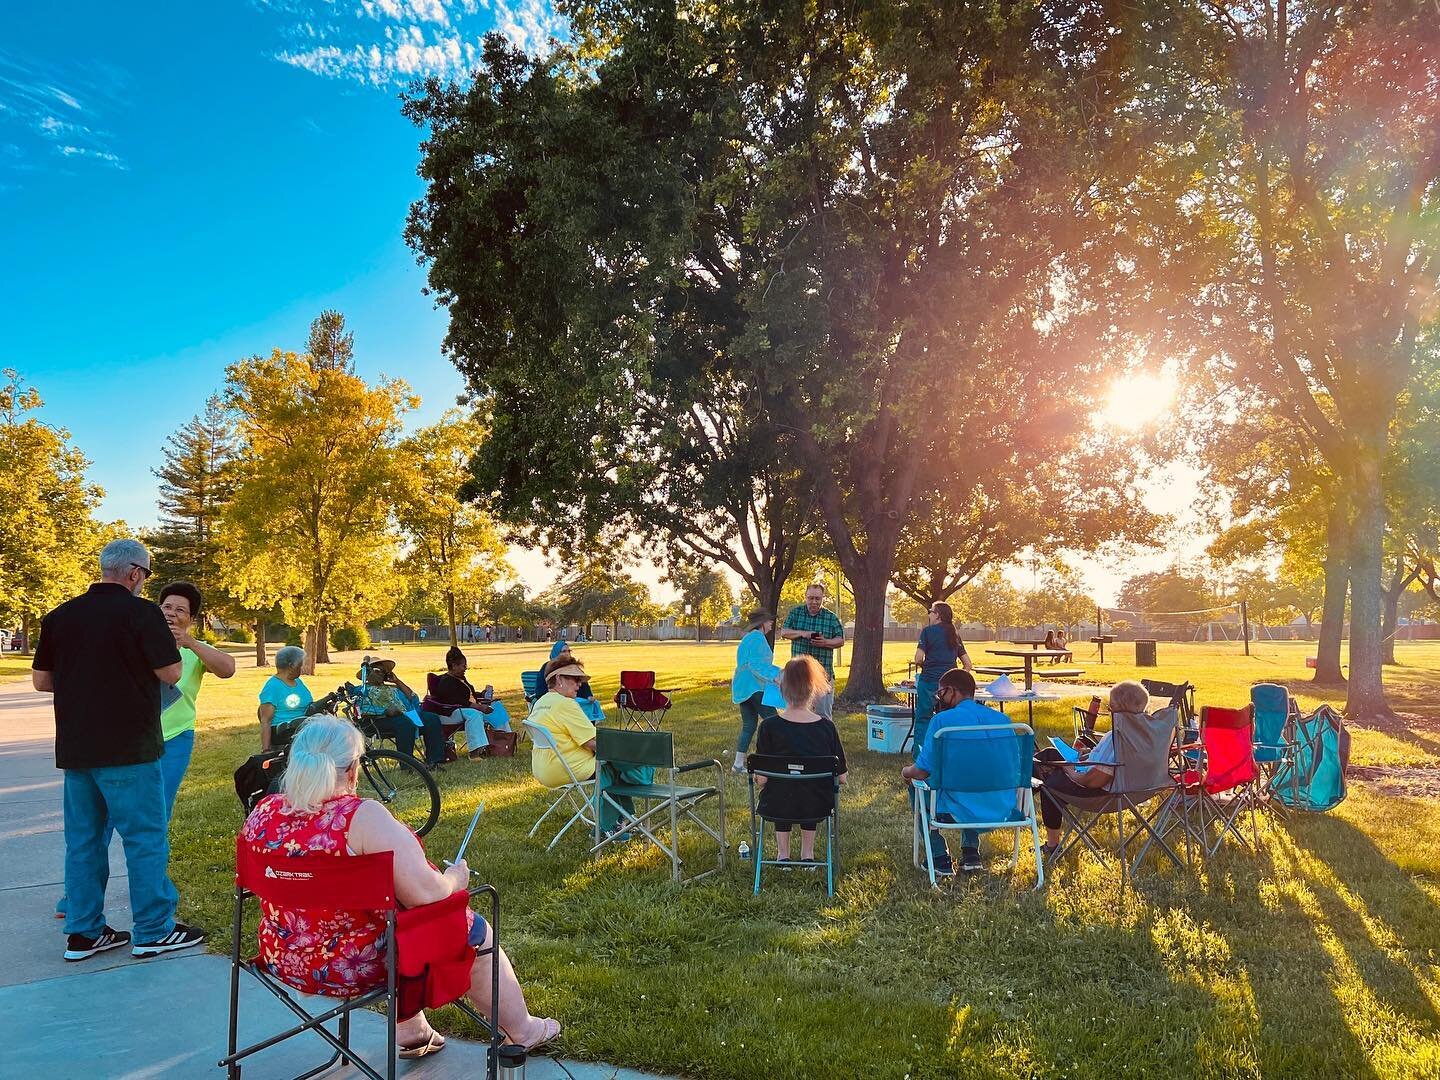 We were thrilled to have our Deerfield Mesa Grande Neighborhood Association gather once again for an in-person meeting at Willie Caston Park last night. If you reside in the Deerfield Mesa Grande area and are interested in joining our neighborhood as